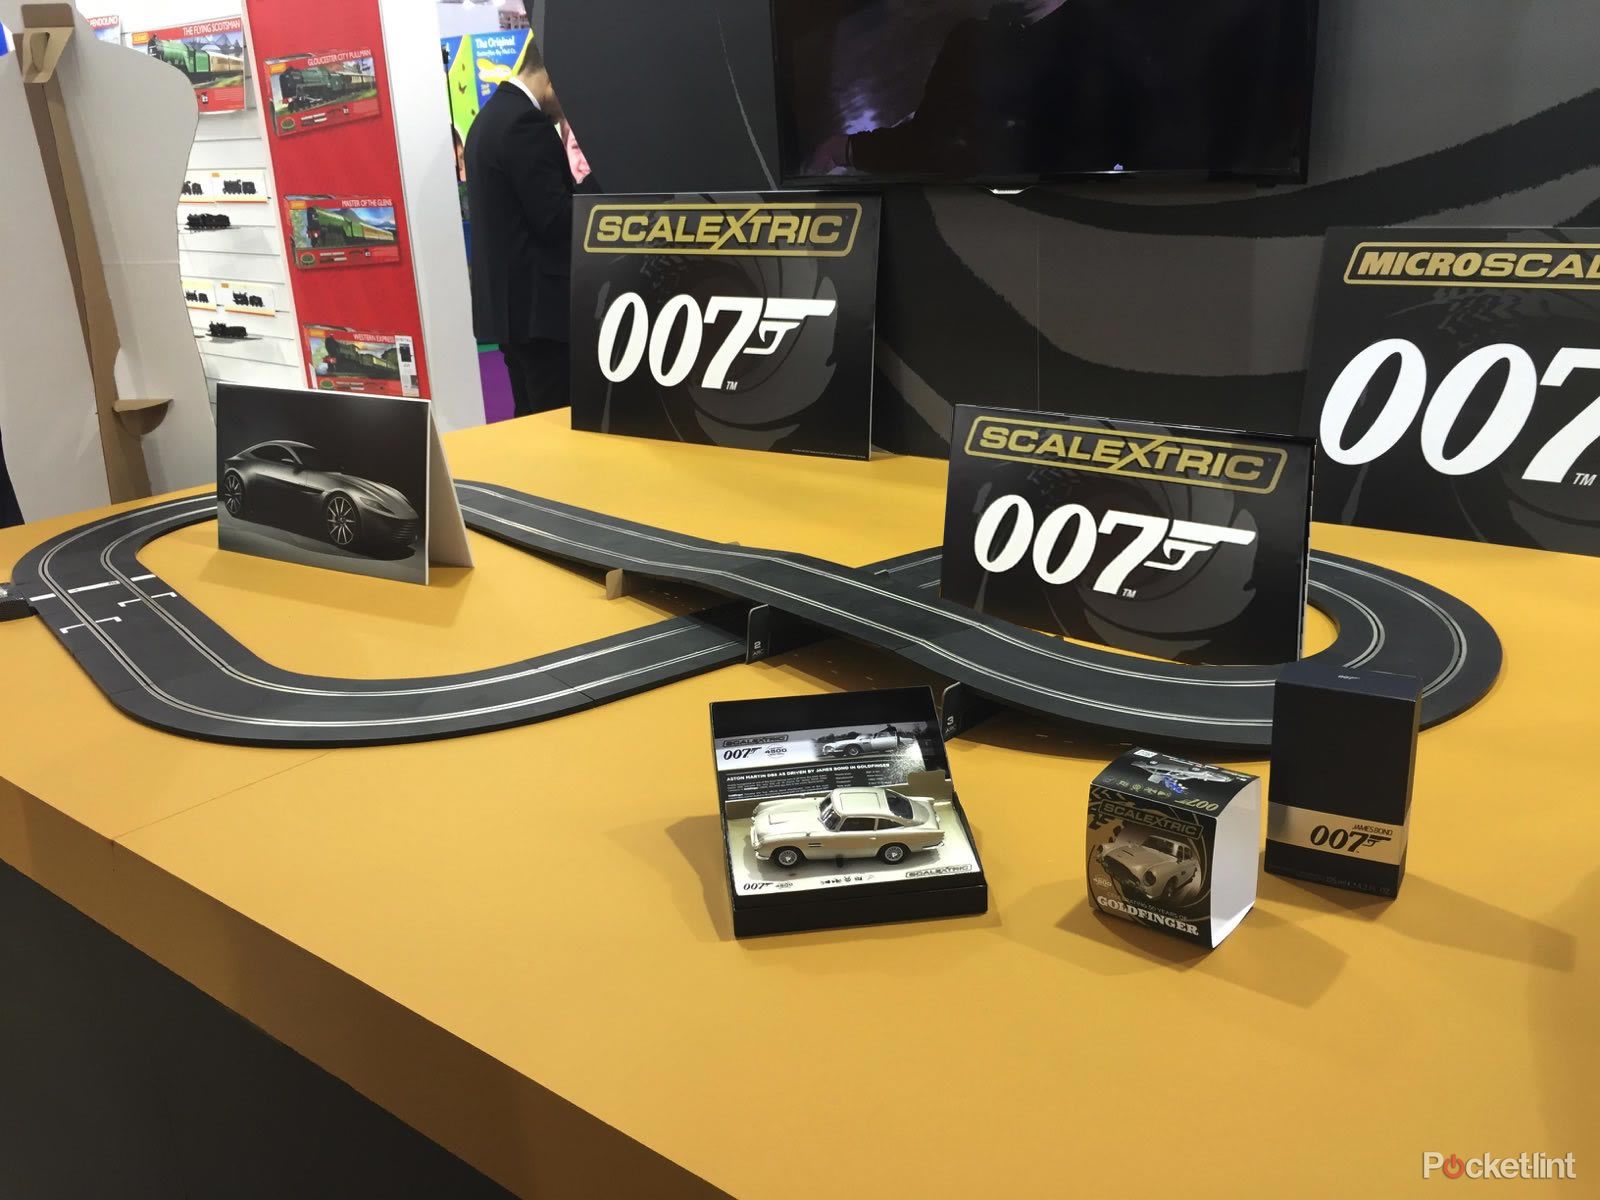 james bond spectre scalextric set confirmed aston martin db10 to be included image 1